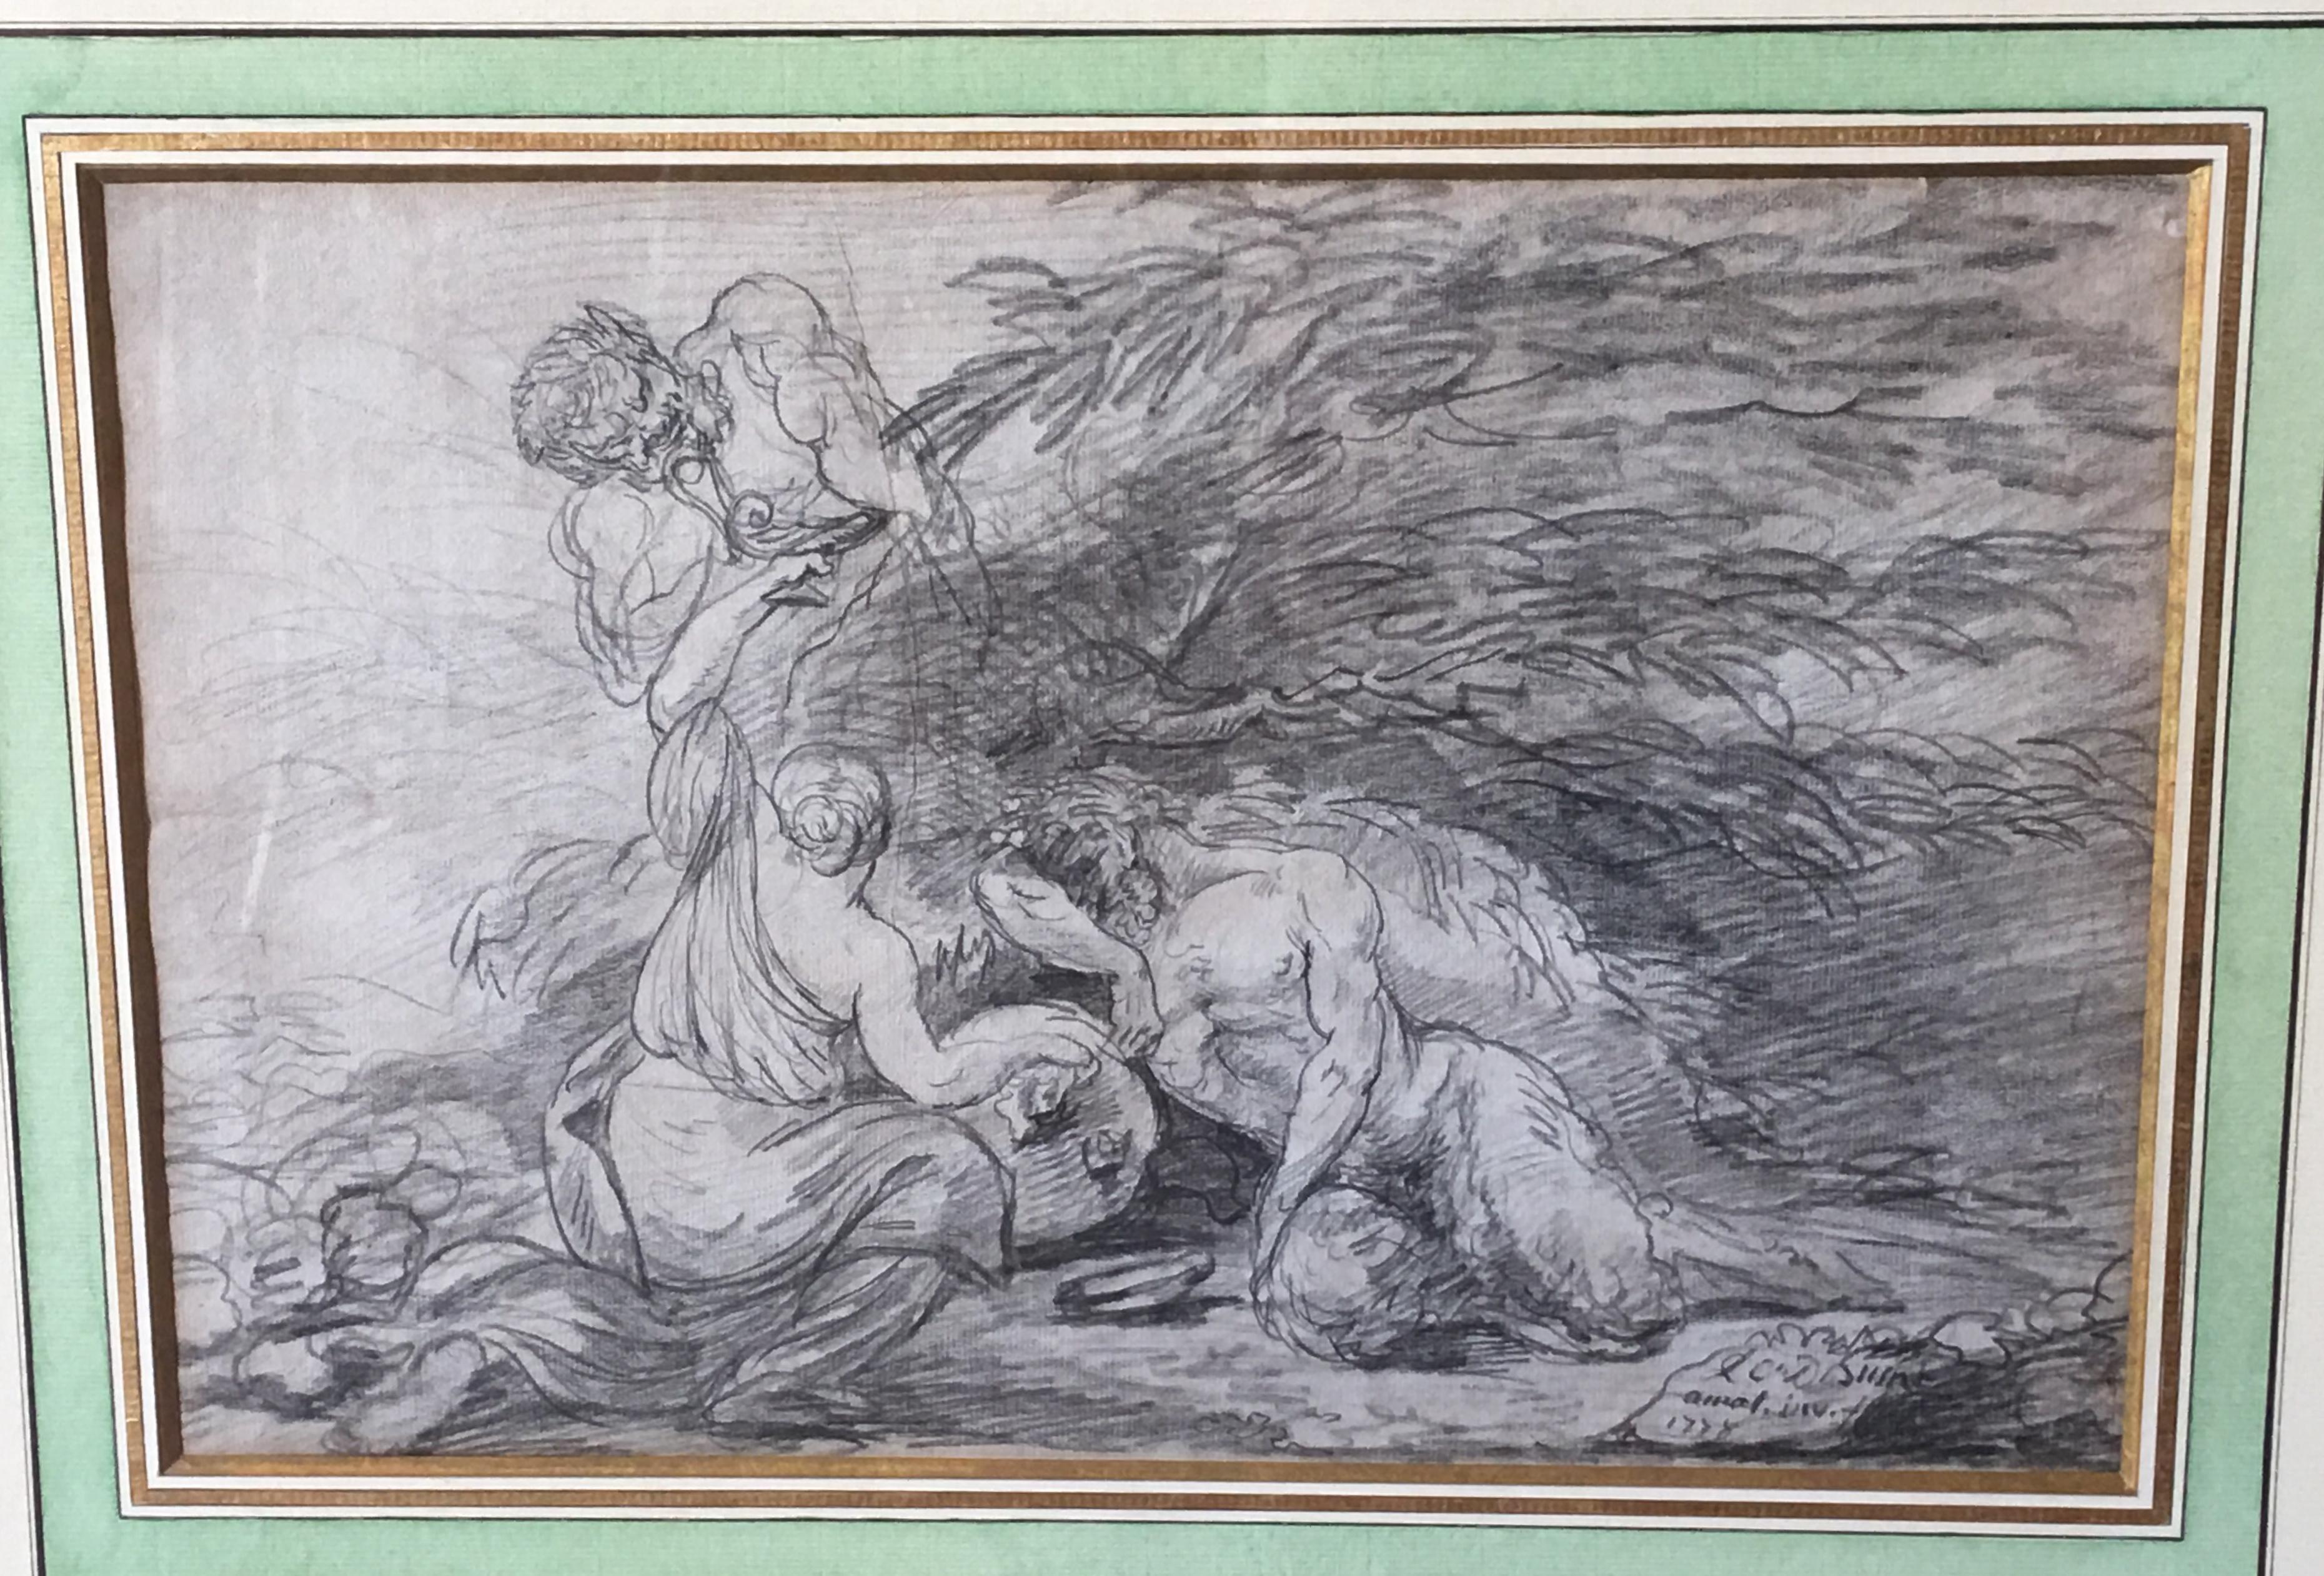 Bacchanal scene with nymp and Satyrs, pencil on Paper signed and dated 1778 - Art by Unknown